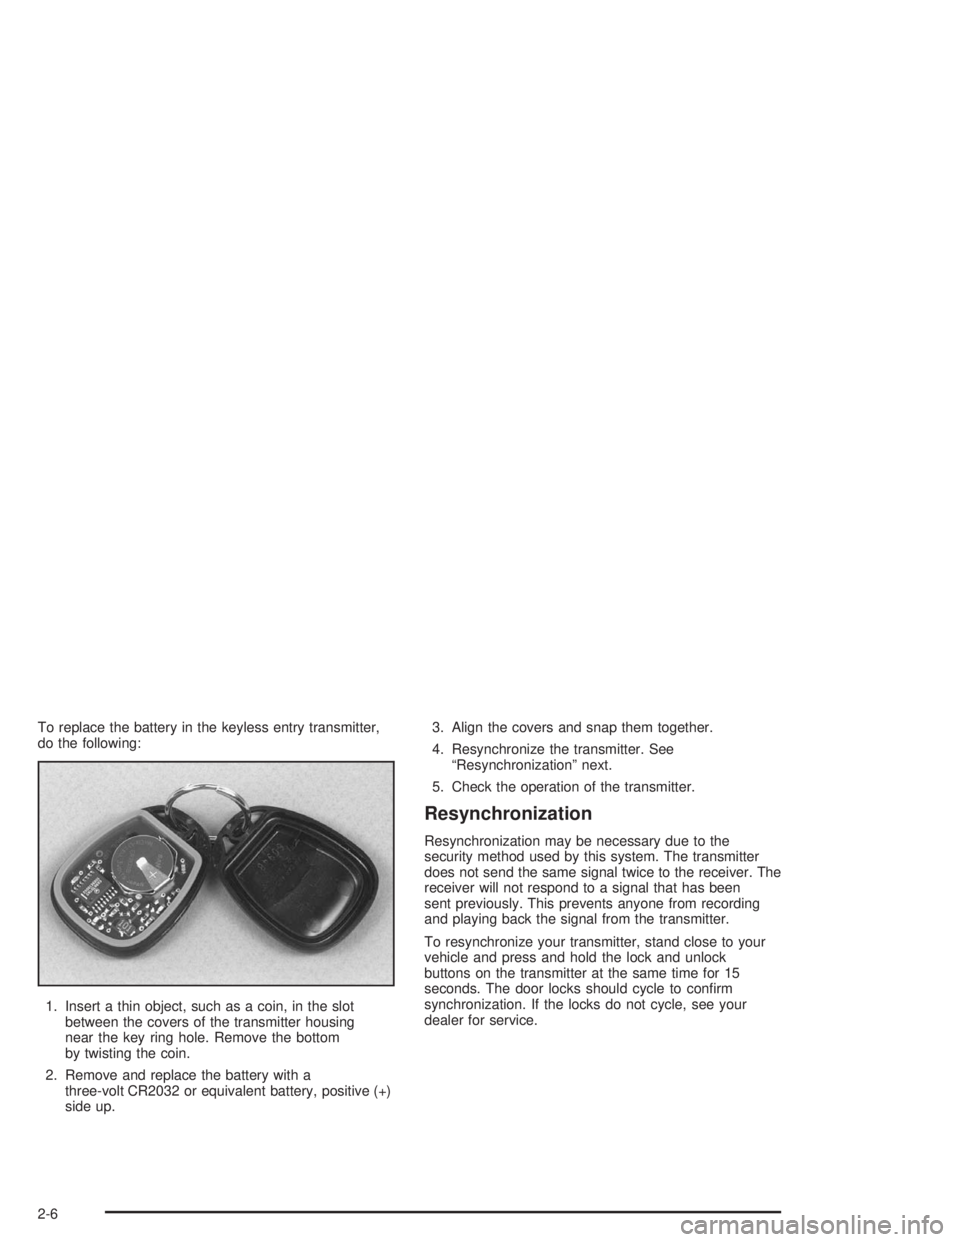 HUMMER H2 2004  Owners Manual To replace the battery in the keyless entry transmitter,
do the following:
1. Insert a thin object, such as a coin, in the slot
between the covers of the transmitter housing
near the key ring hole. Re